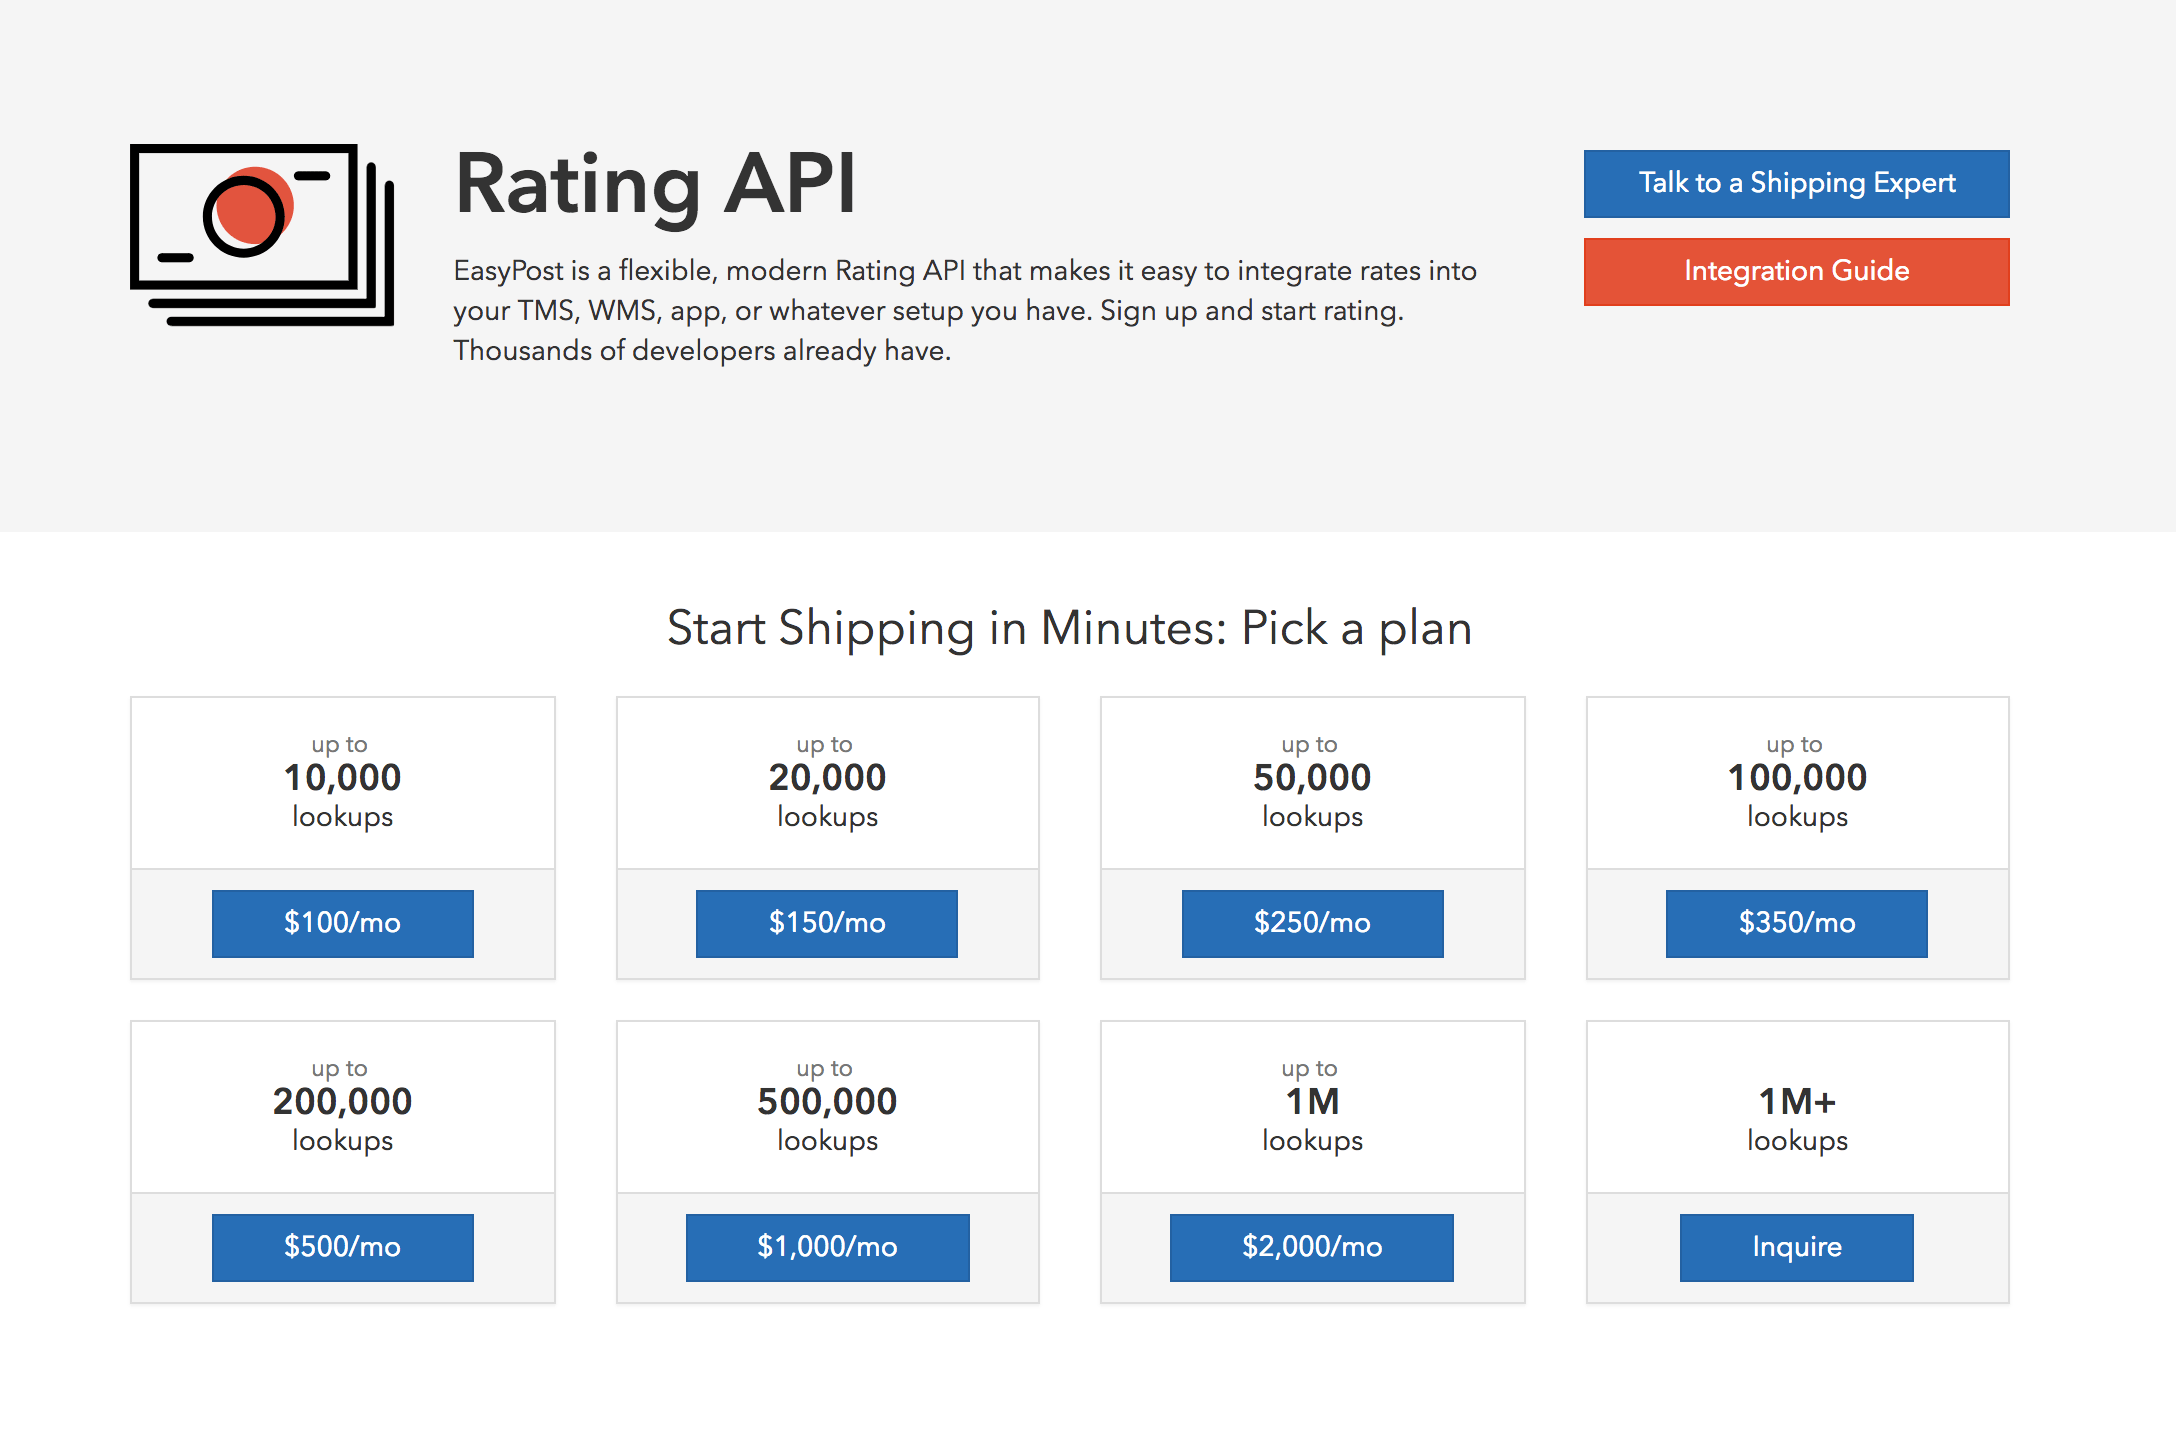 Screenshot of EasyPost's Rating API pricing page